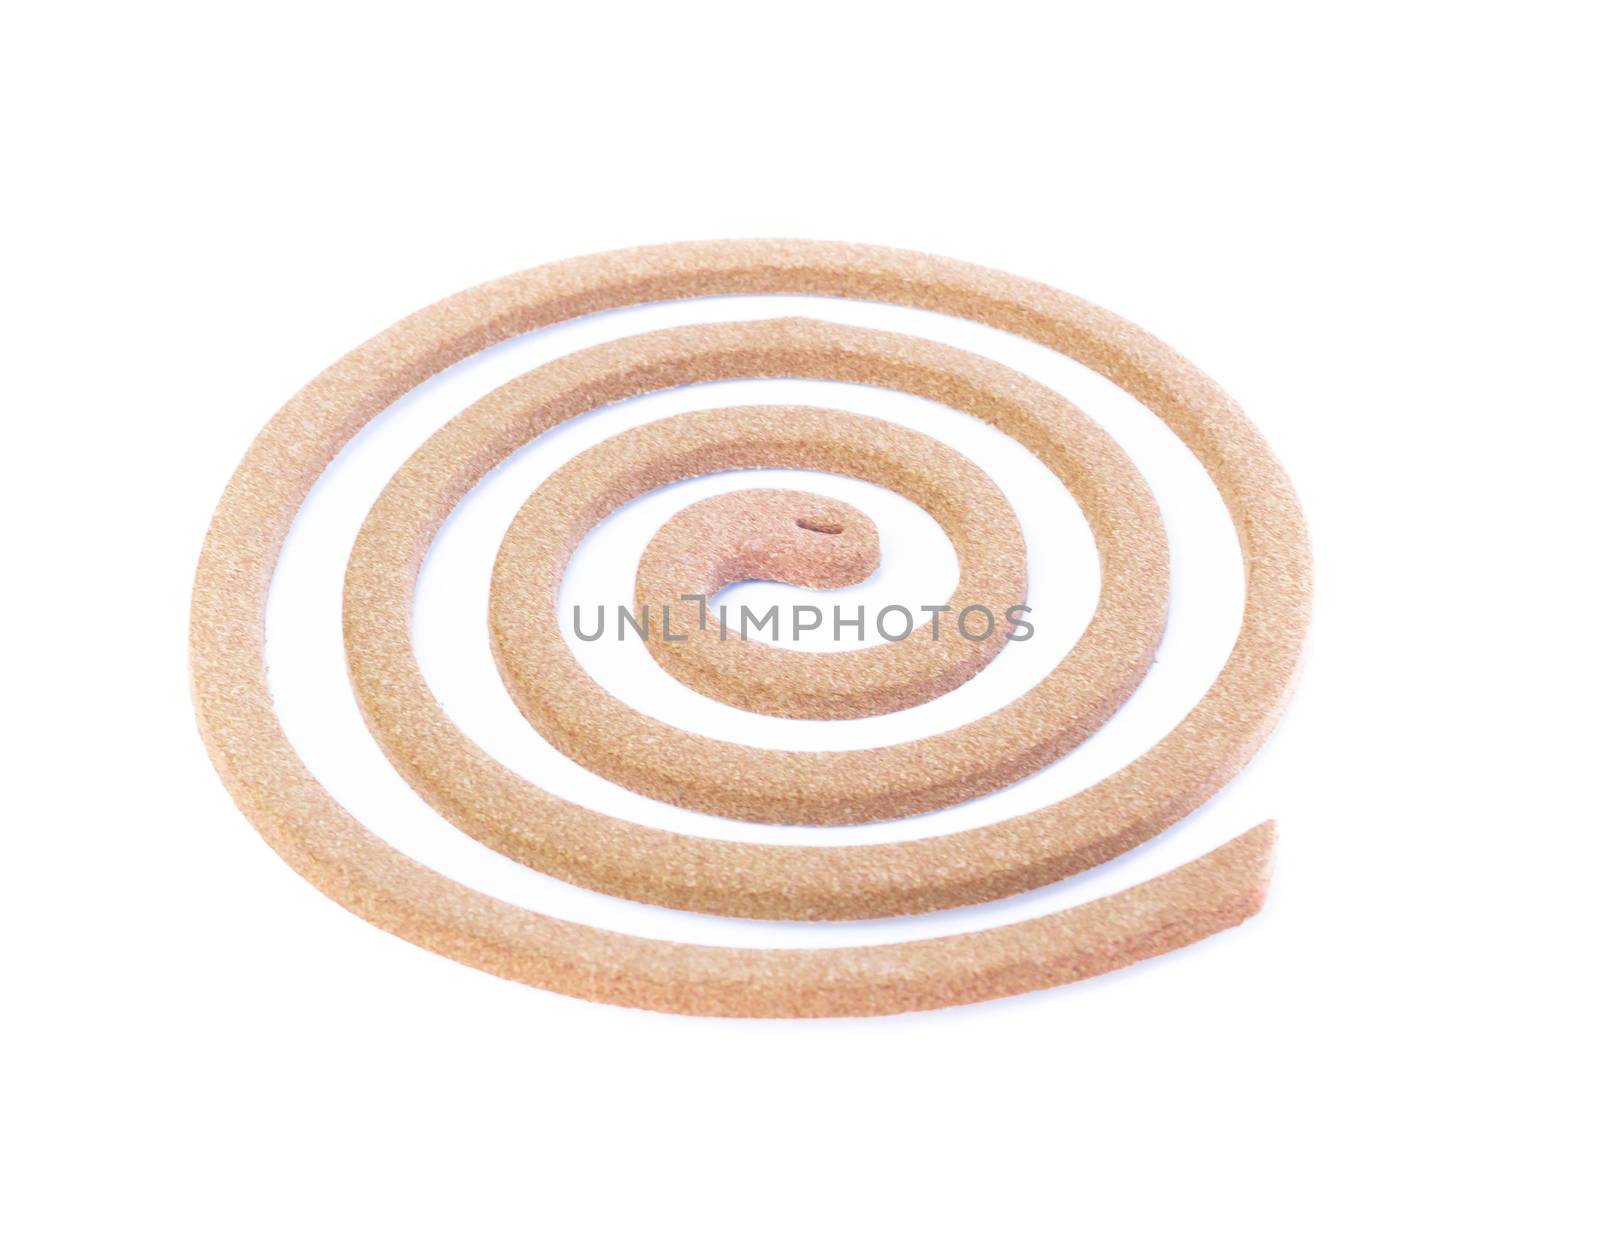 Mosquito coil with lemongrass isolated on white background